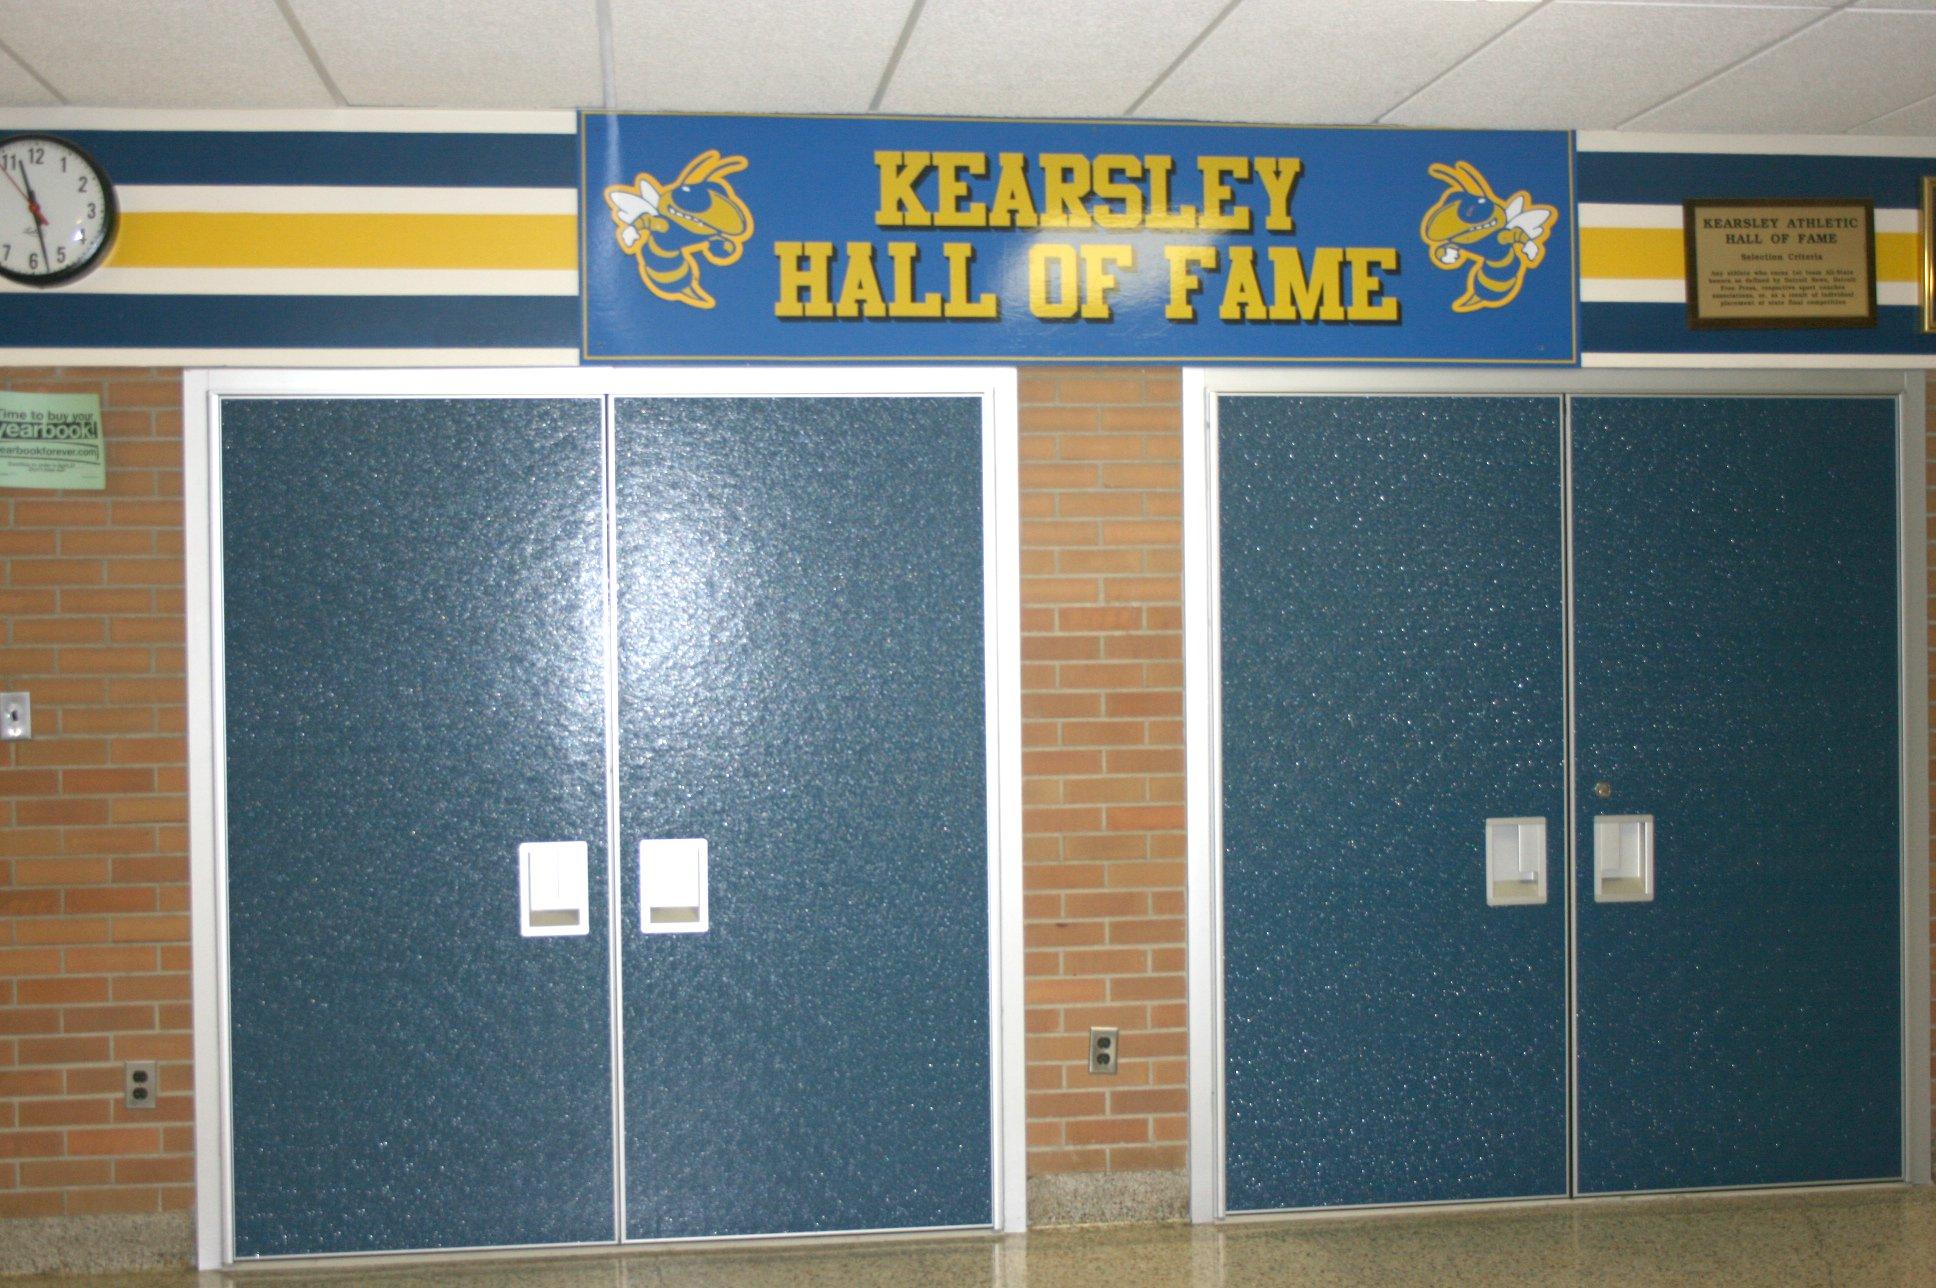 The new doors to the gymnasium add security, as well as trapping sound so that the hallways are quieter.